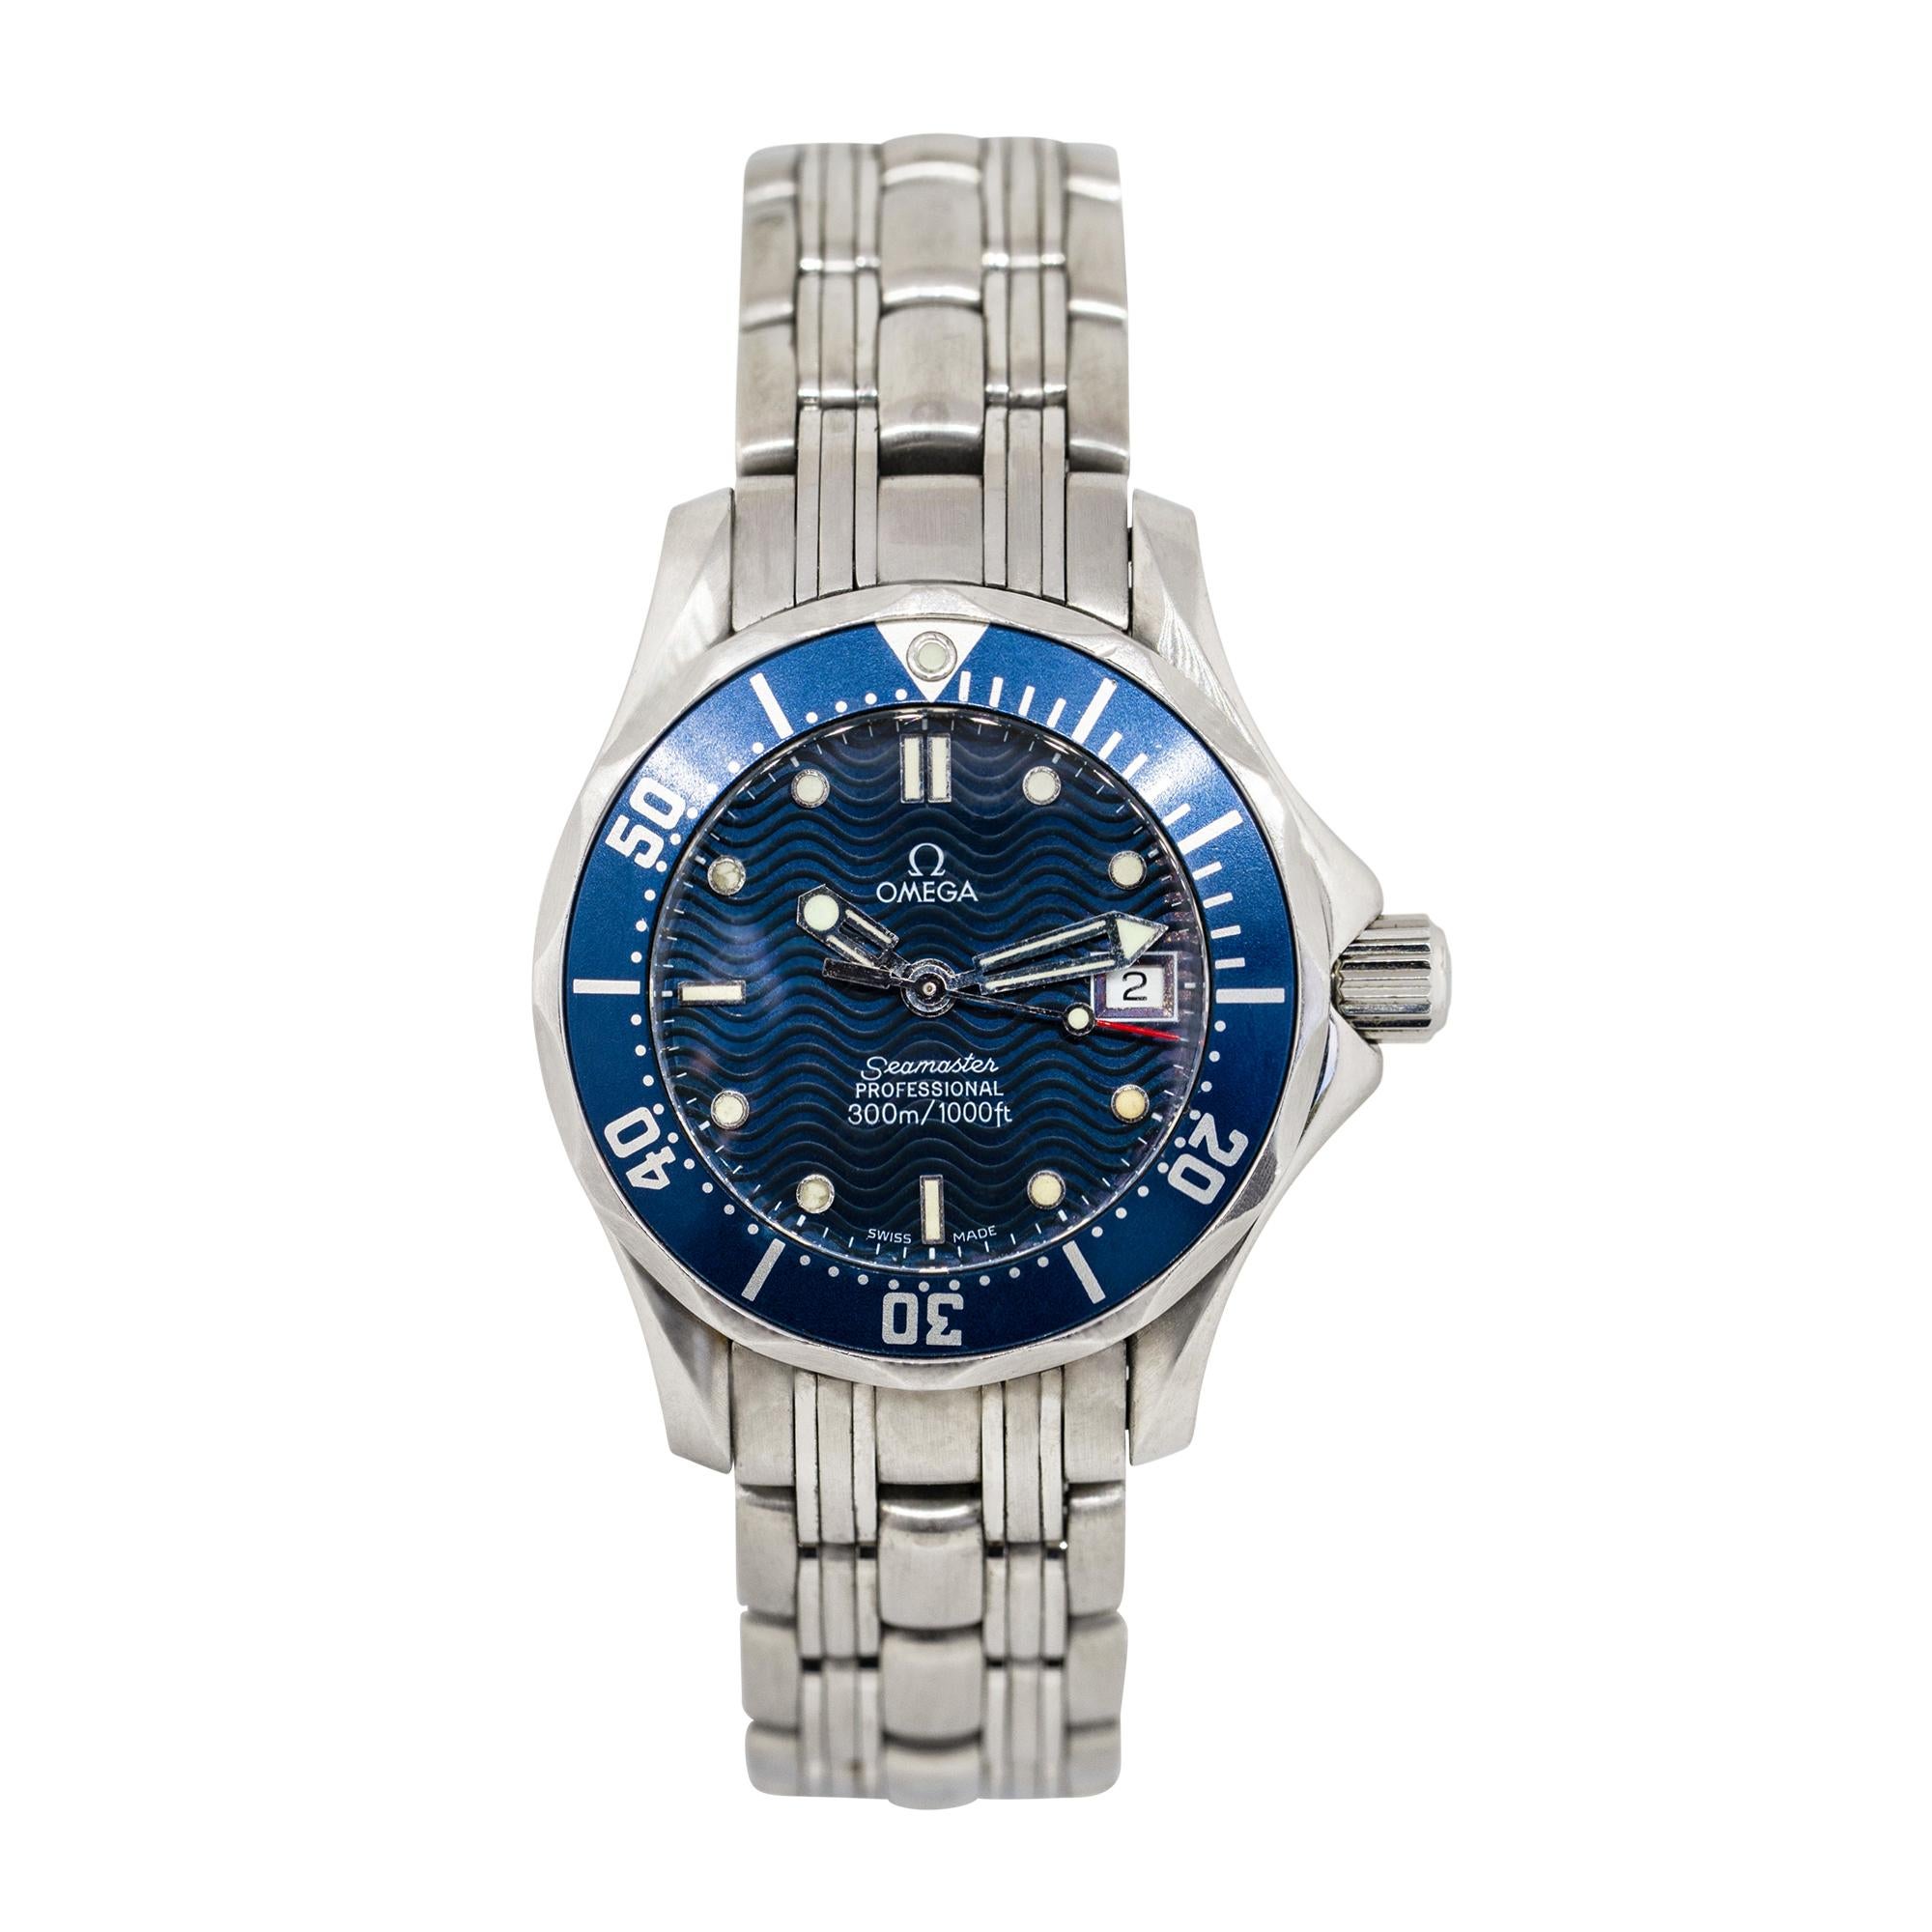 Brand: Omega
Model: Seamaster
Case Material: Stainless Steel
Case Diameter: 28 mm
Crystal: Scratch resistant sapphire
Bezel: Blue Unidirectional Bezel
Dial: Blue wave decor dial with luminous hands and hour markers
Bracelet: Stainless Steel
Size: